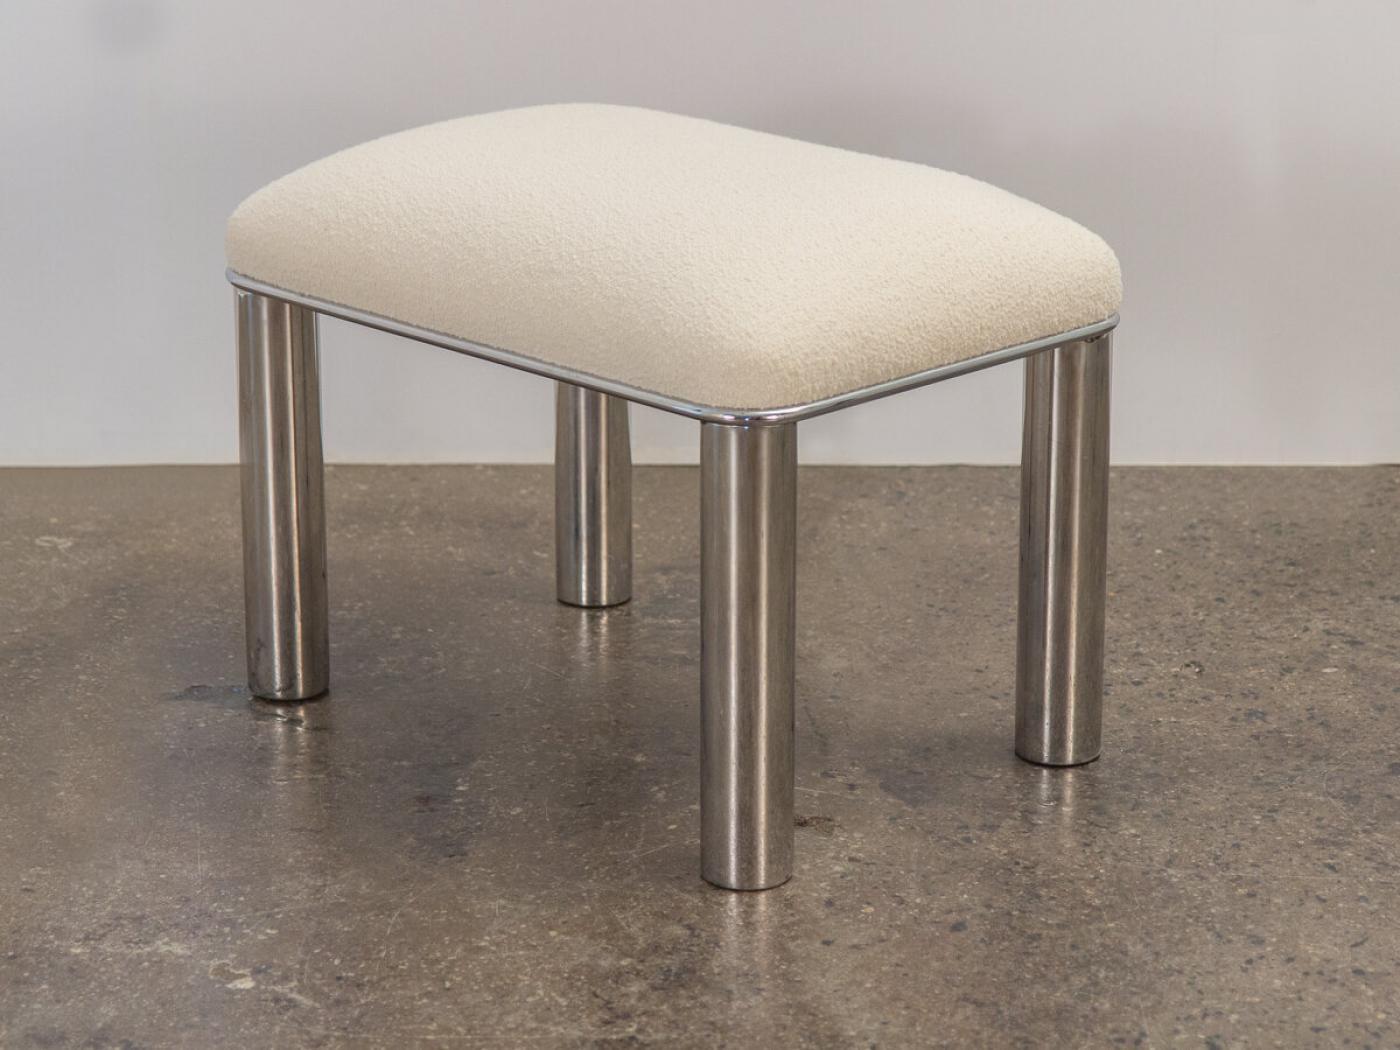 Glamorous rectangular ottoman with polished chrome base from Pace Collection. A playful, rounded form with chubby, tubular legs. The plush seat cushion has been newly replenished and upholstered in luxurious Knoll boucle in Pearl. Excellent